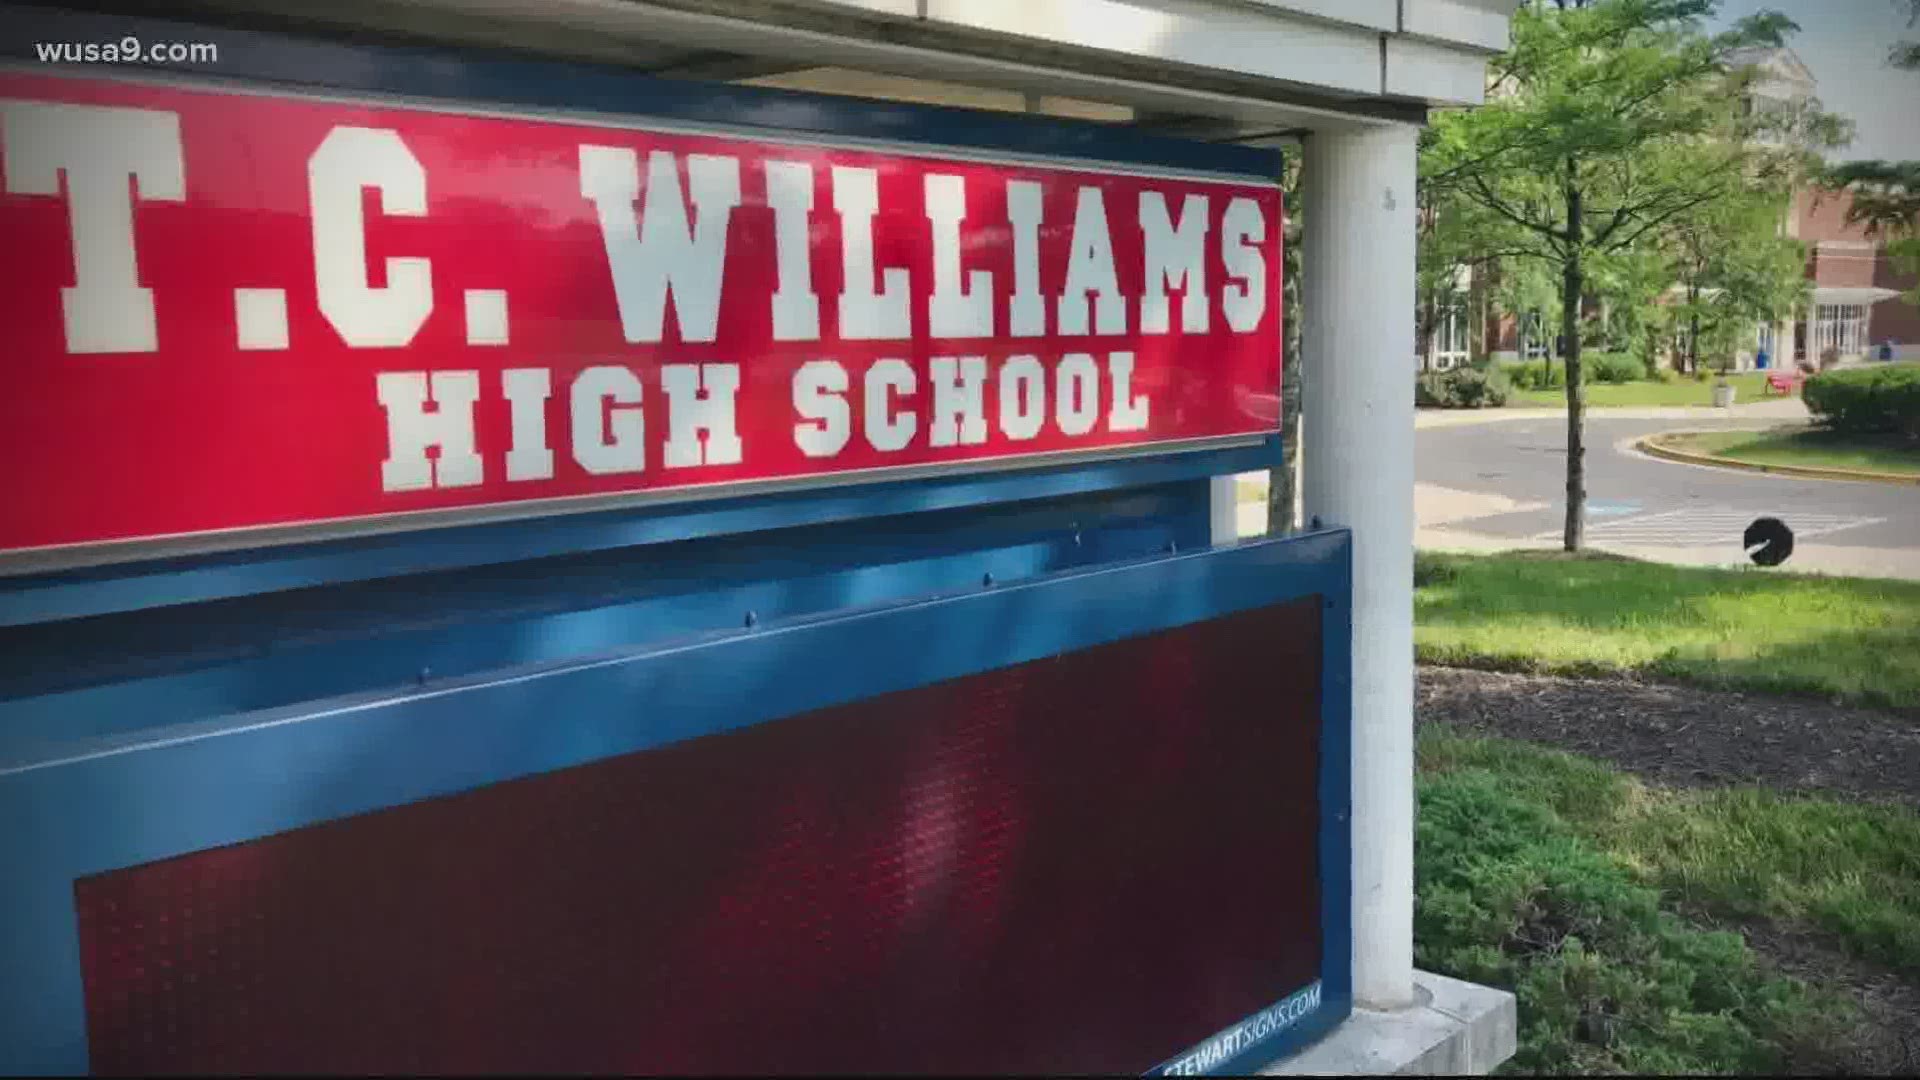 Alexandria residents are pushing to change the name of the famed T.C. Williams High School.